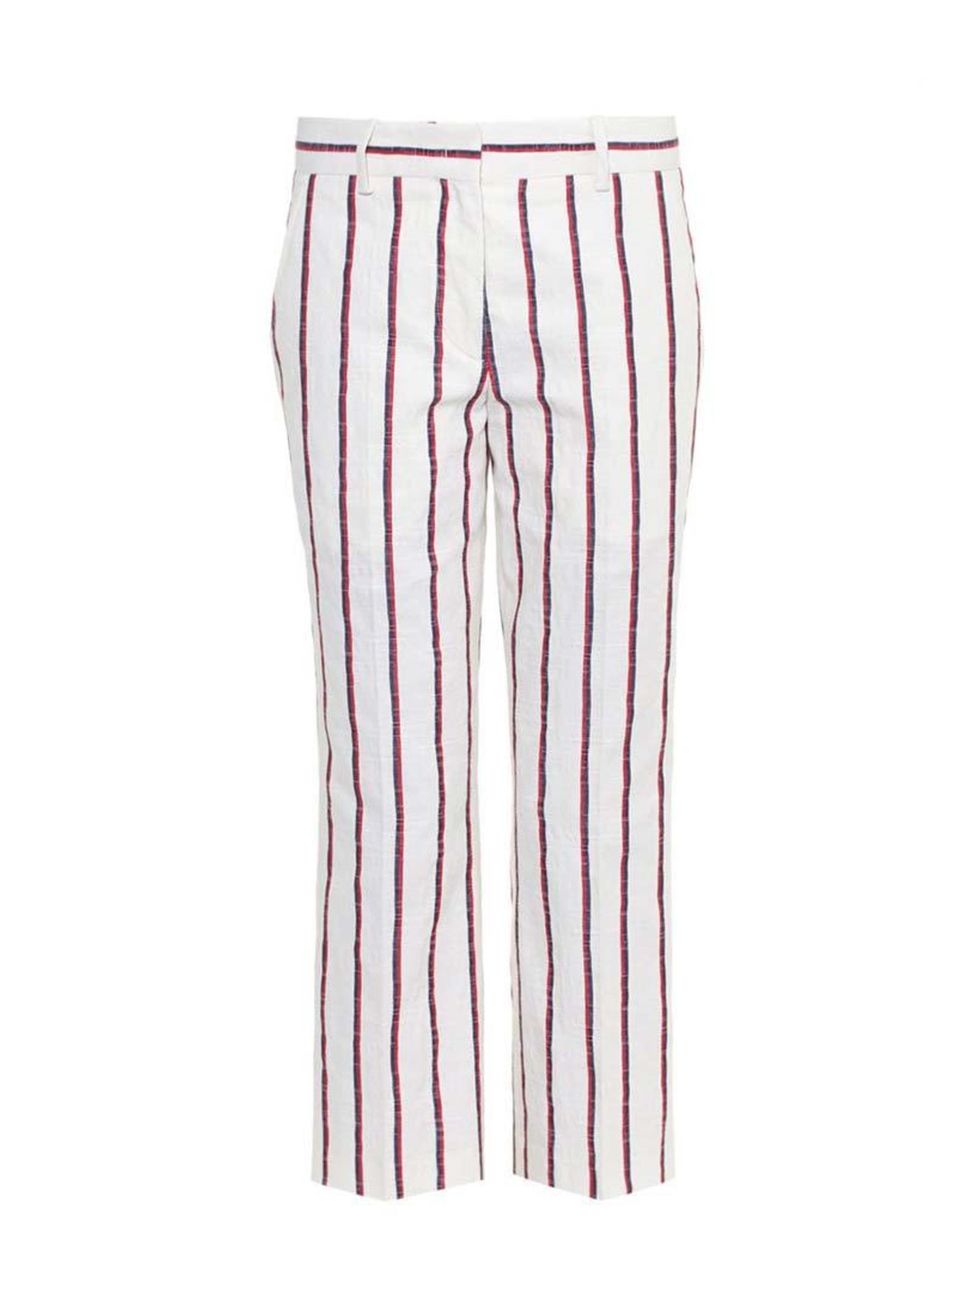 <p>A few hours of sunshine has us giddily planning our summer wardrobes.</p>

<p>Isabel Marant Étoile trousers, £200 at <a href="http://www.matchesfashion.com/product/1001742" target="_blank">MatchesFashion.com</a></p>